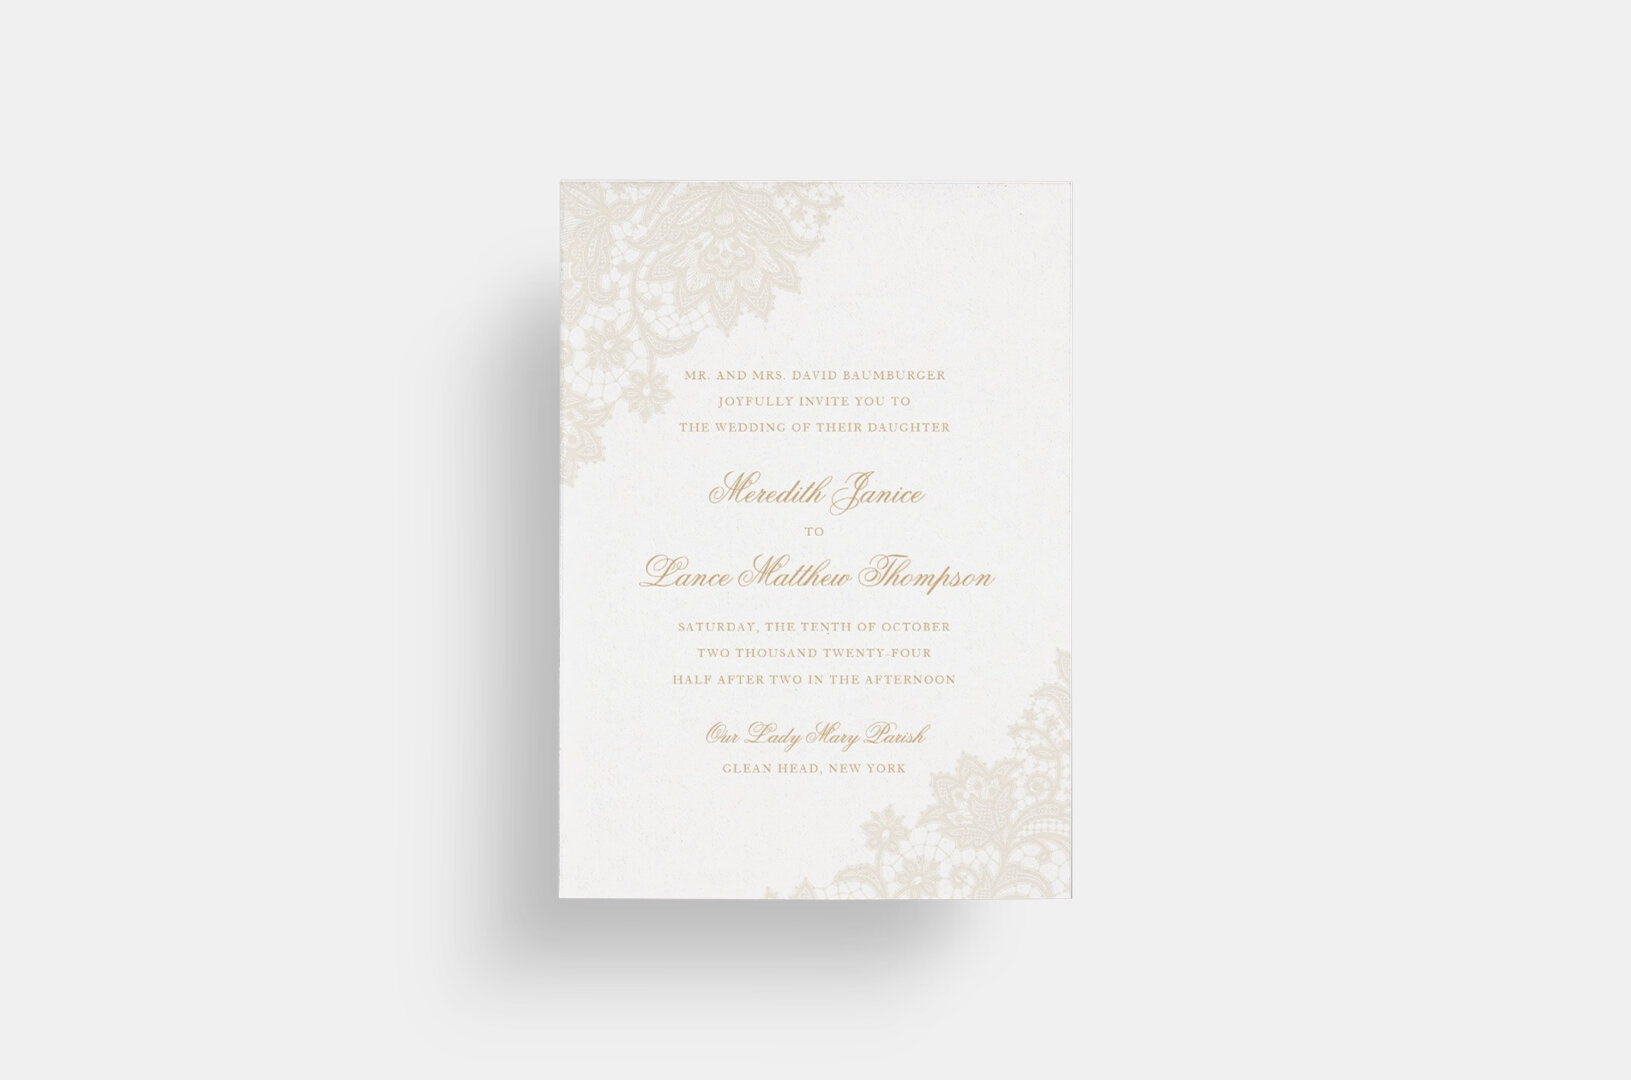 Delicate Lace Suite Sincerely Jackie Long Island Wedding Invitations 4.jpg